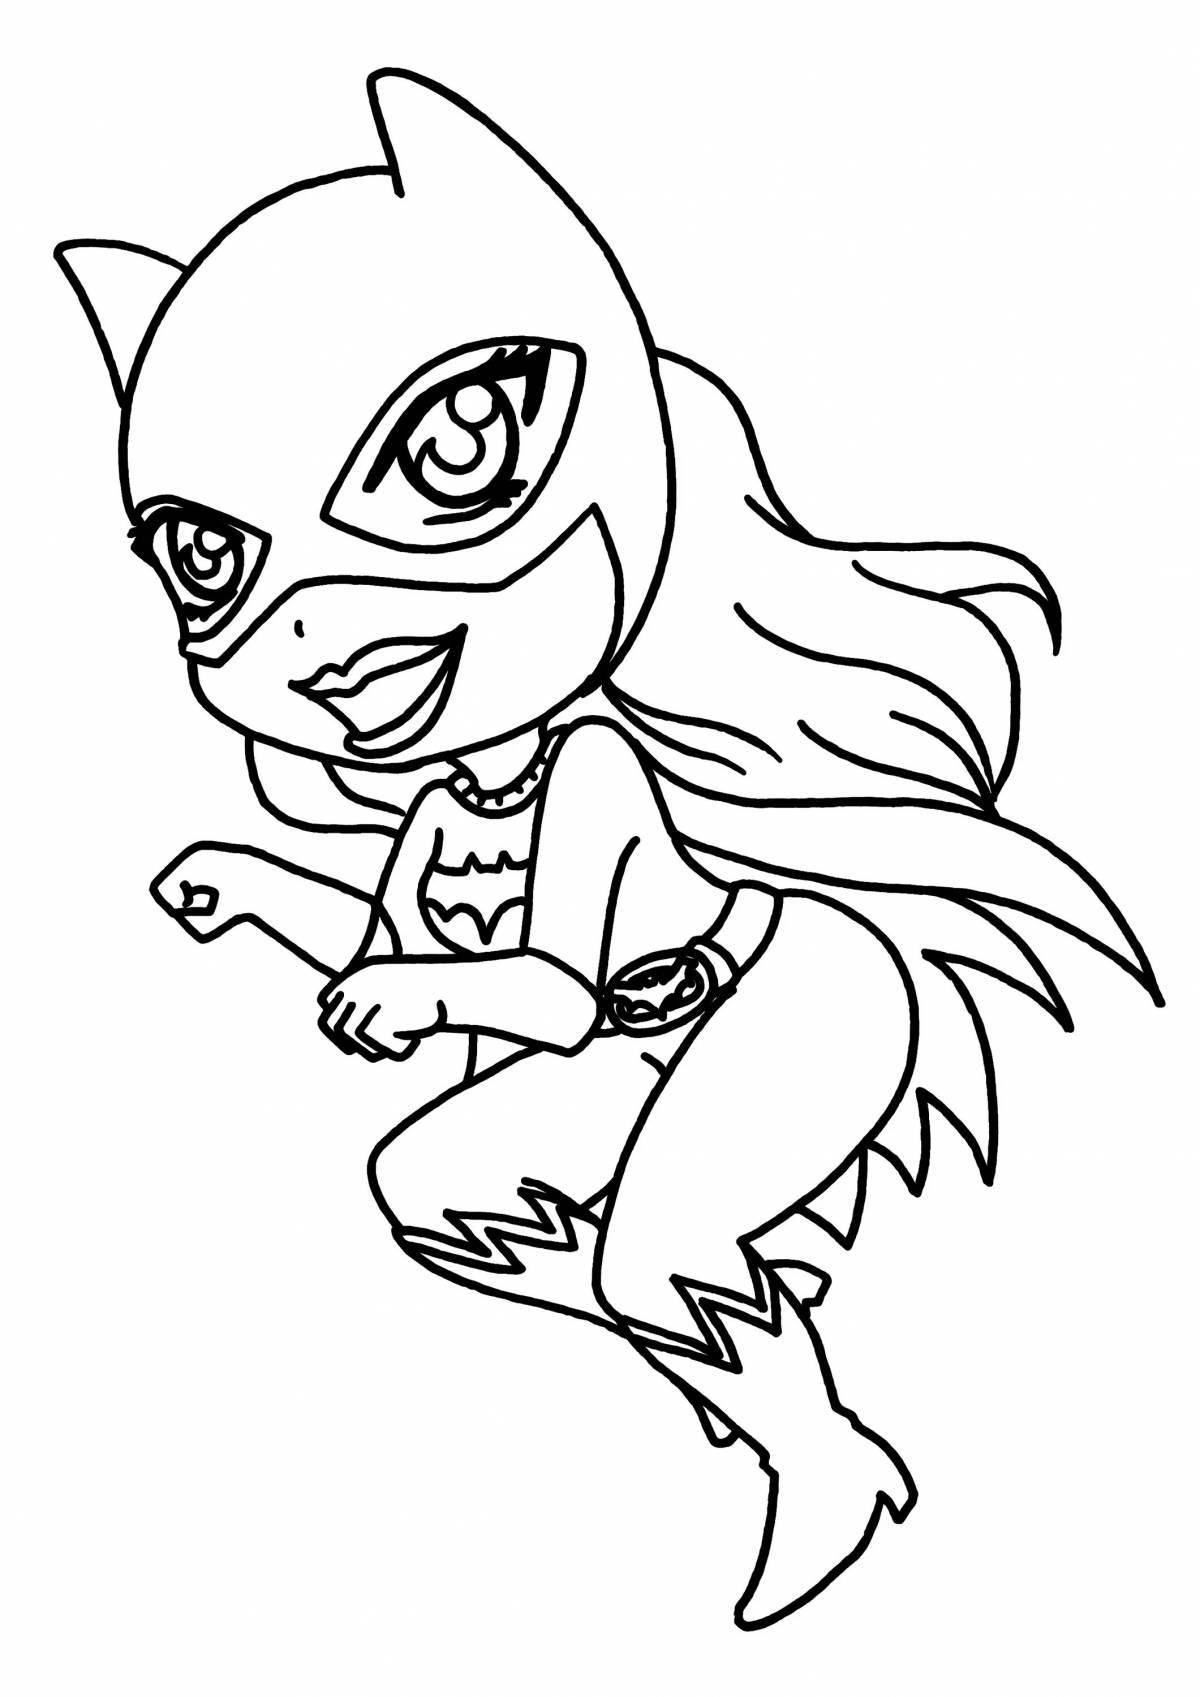 Coloring book brave catwoman